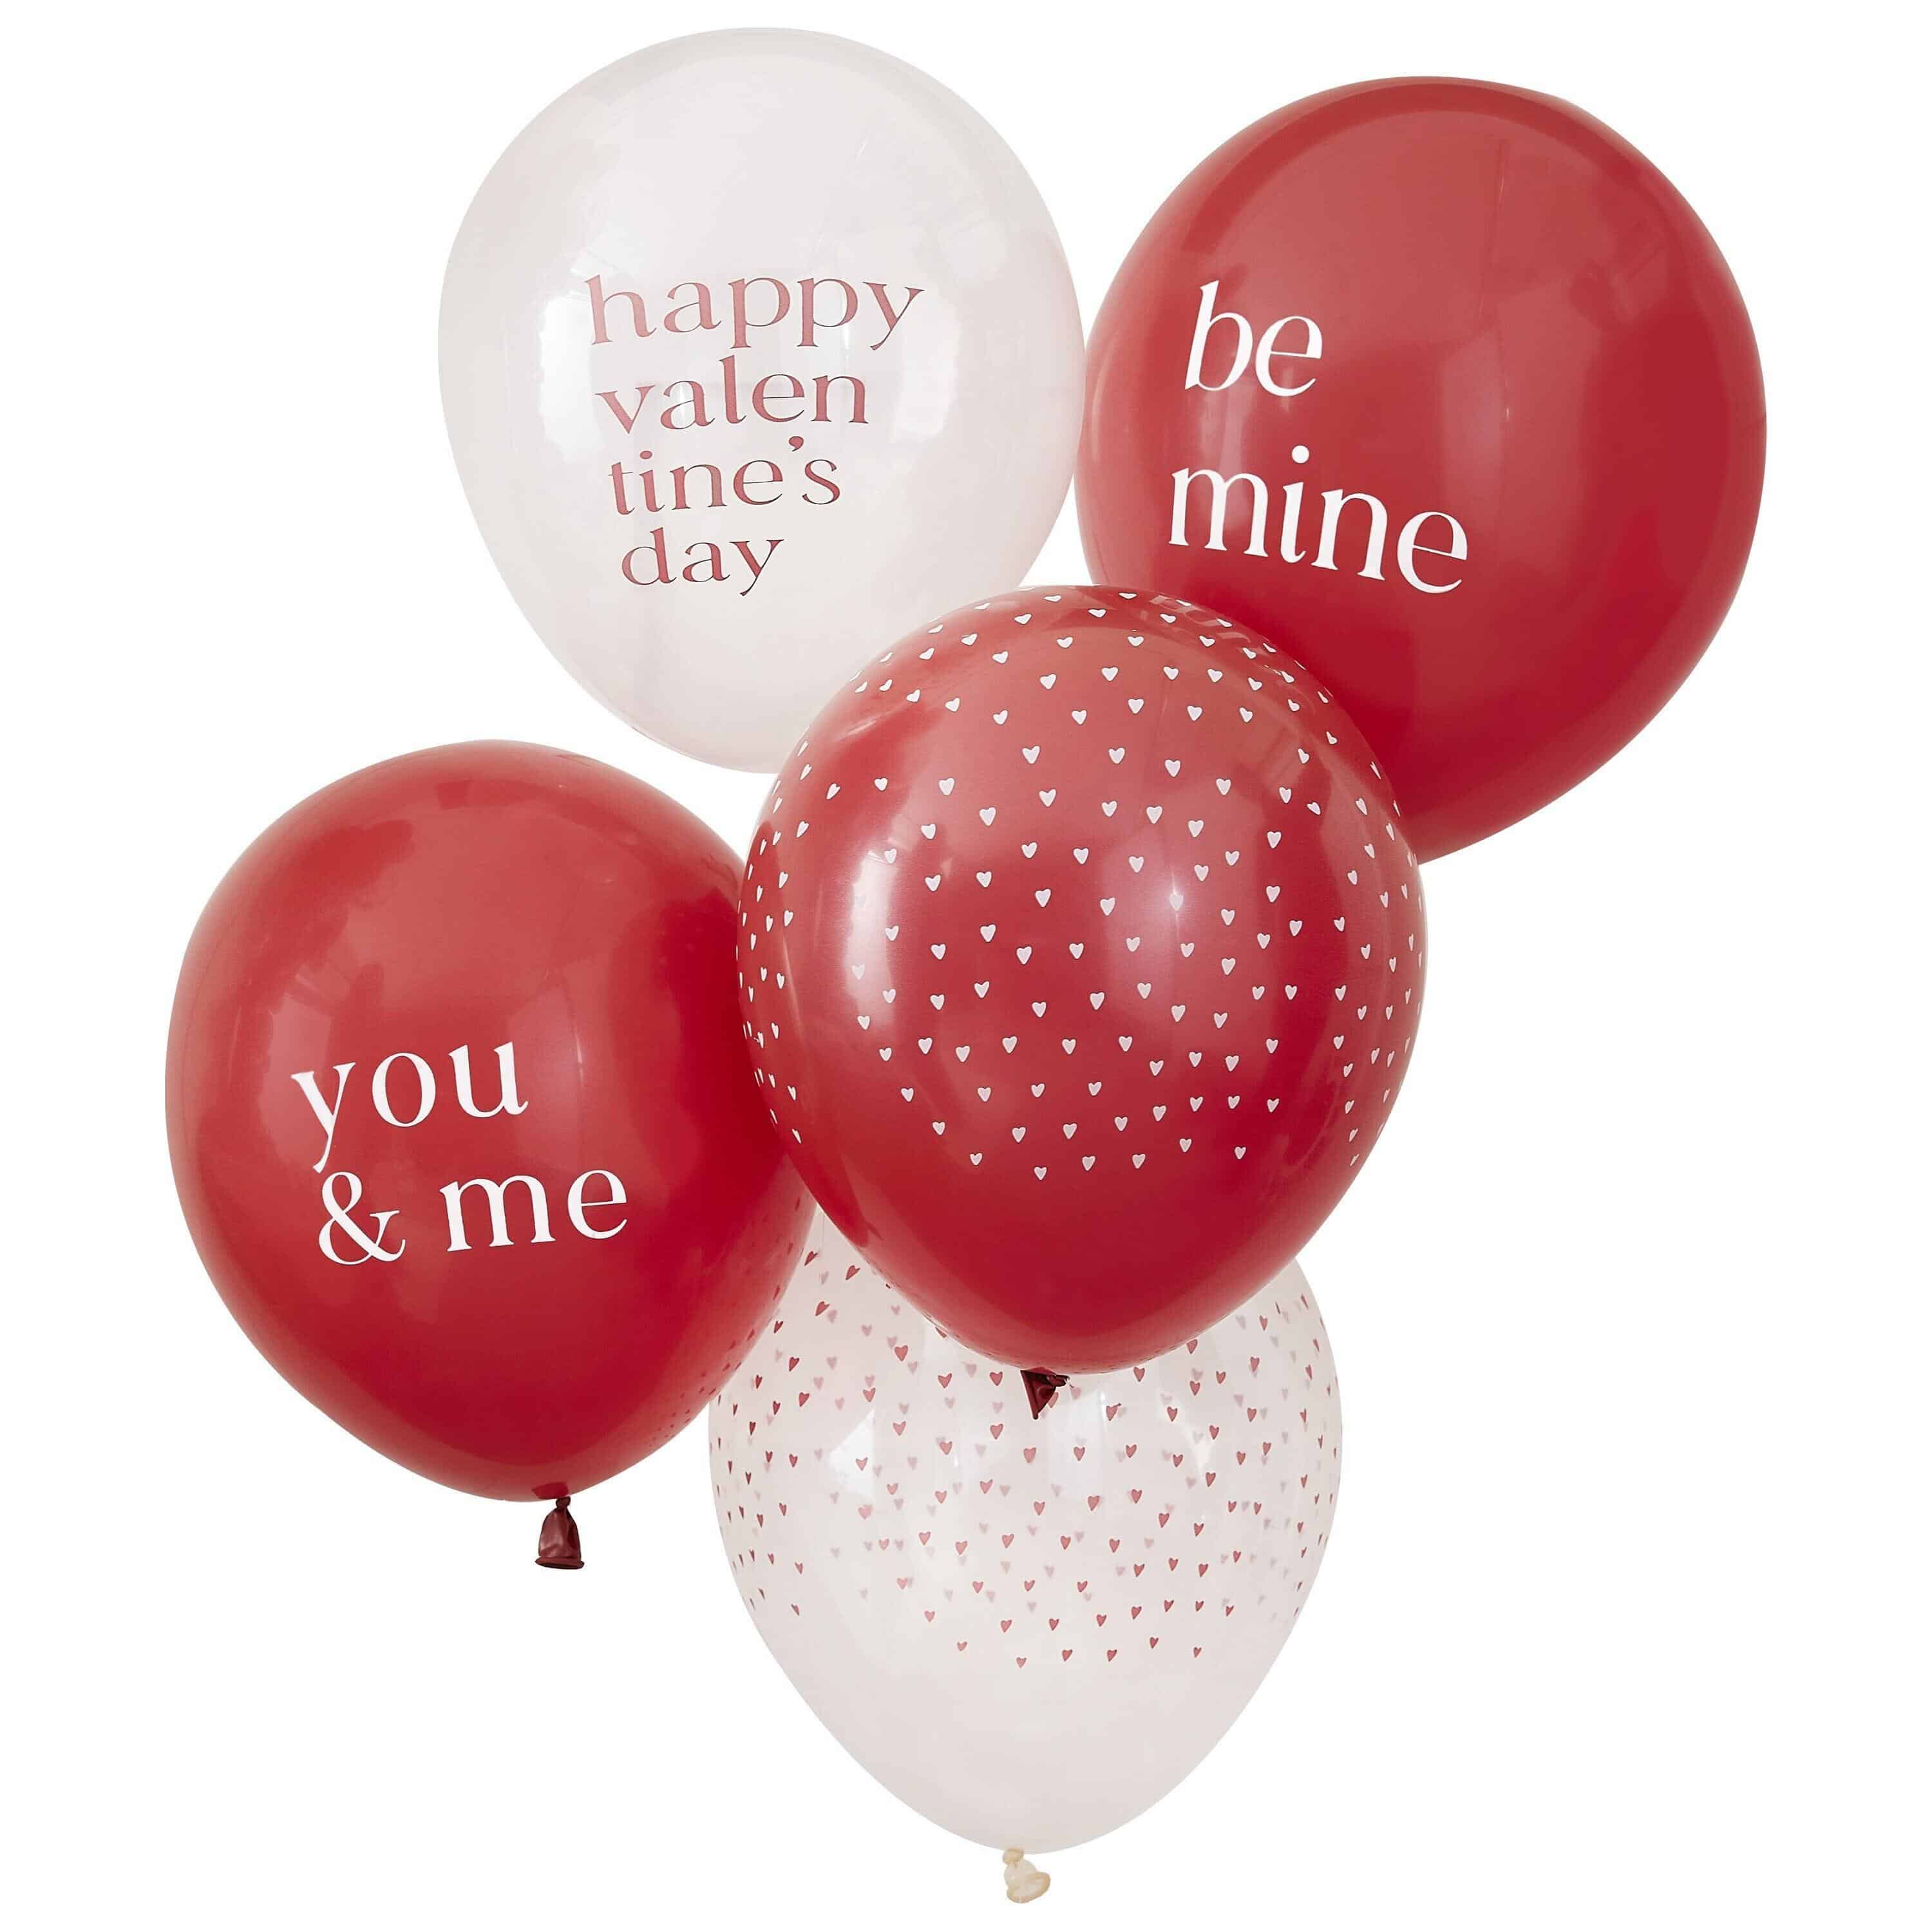 Valentines day balloons